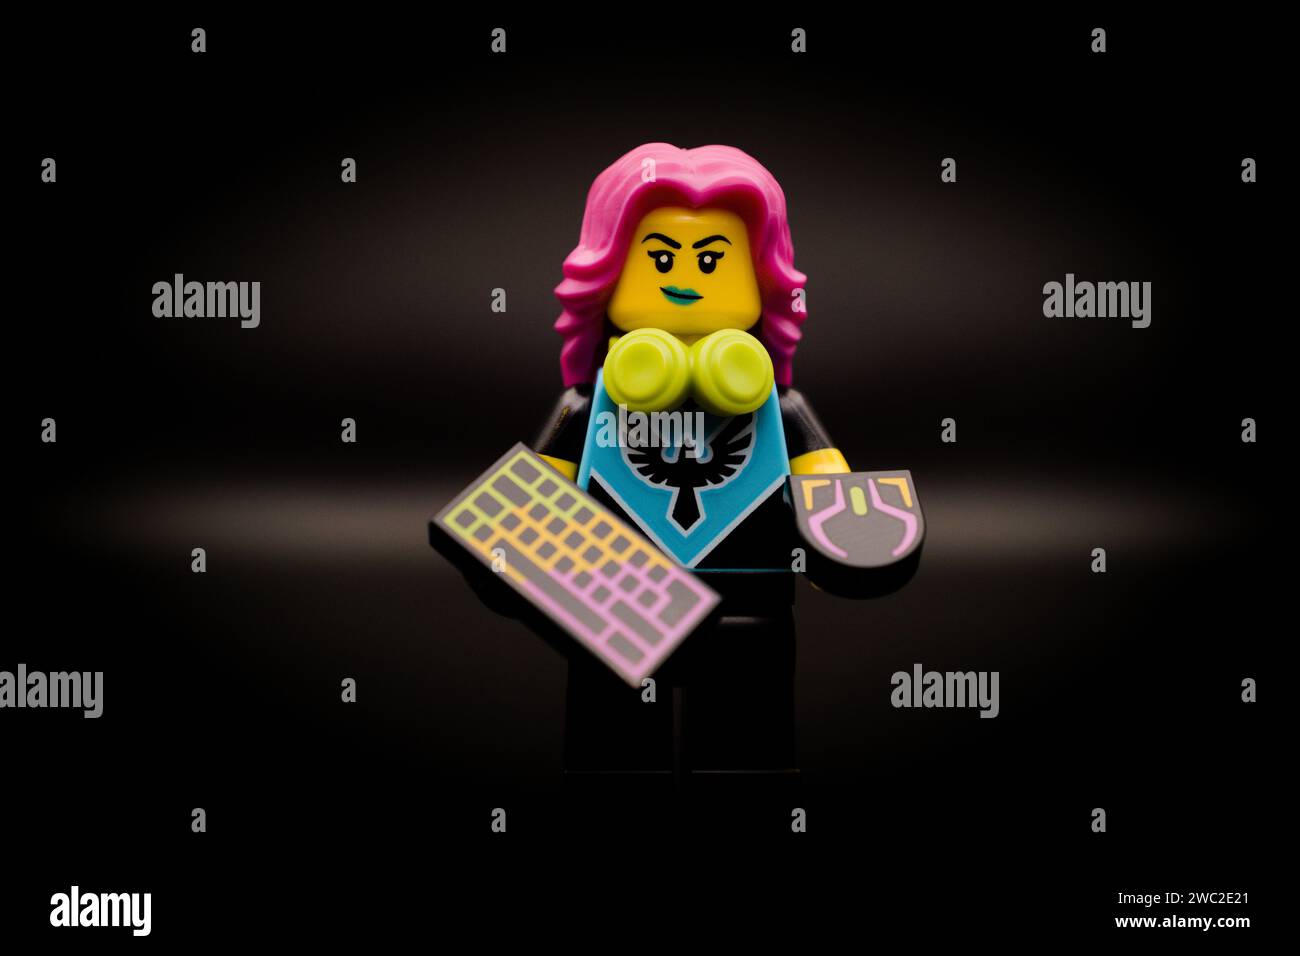 A PC Gamer. Lego minifigure and all other bricks are made by THE LEGO GROUP Stock Photo